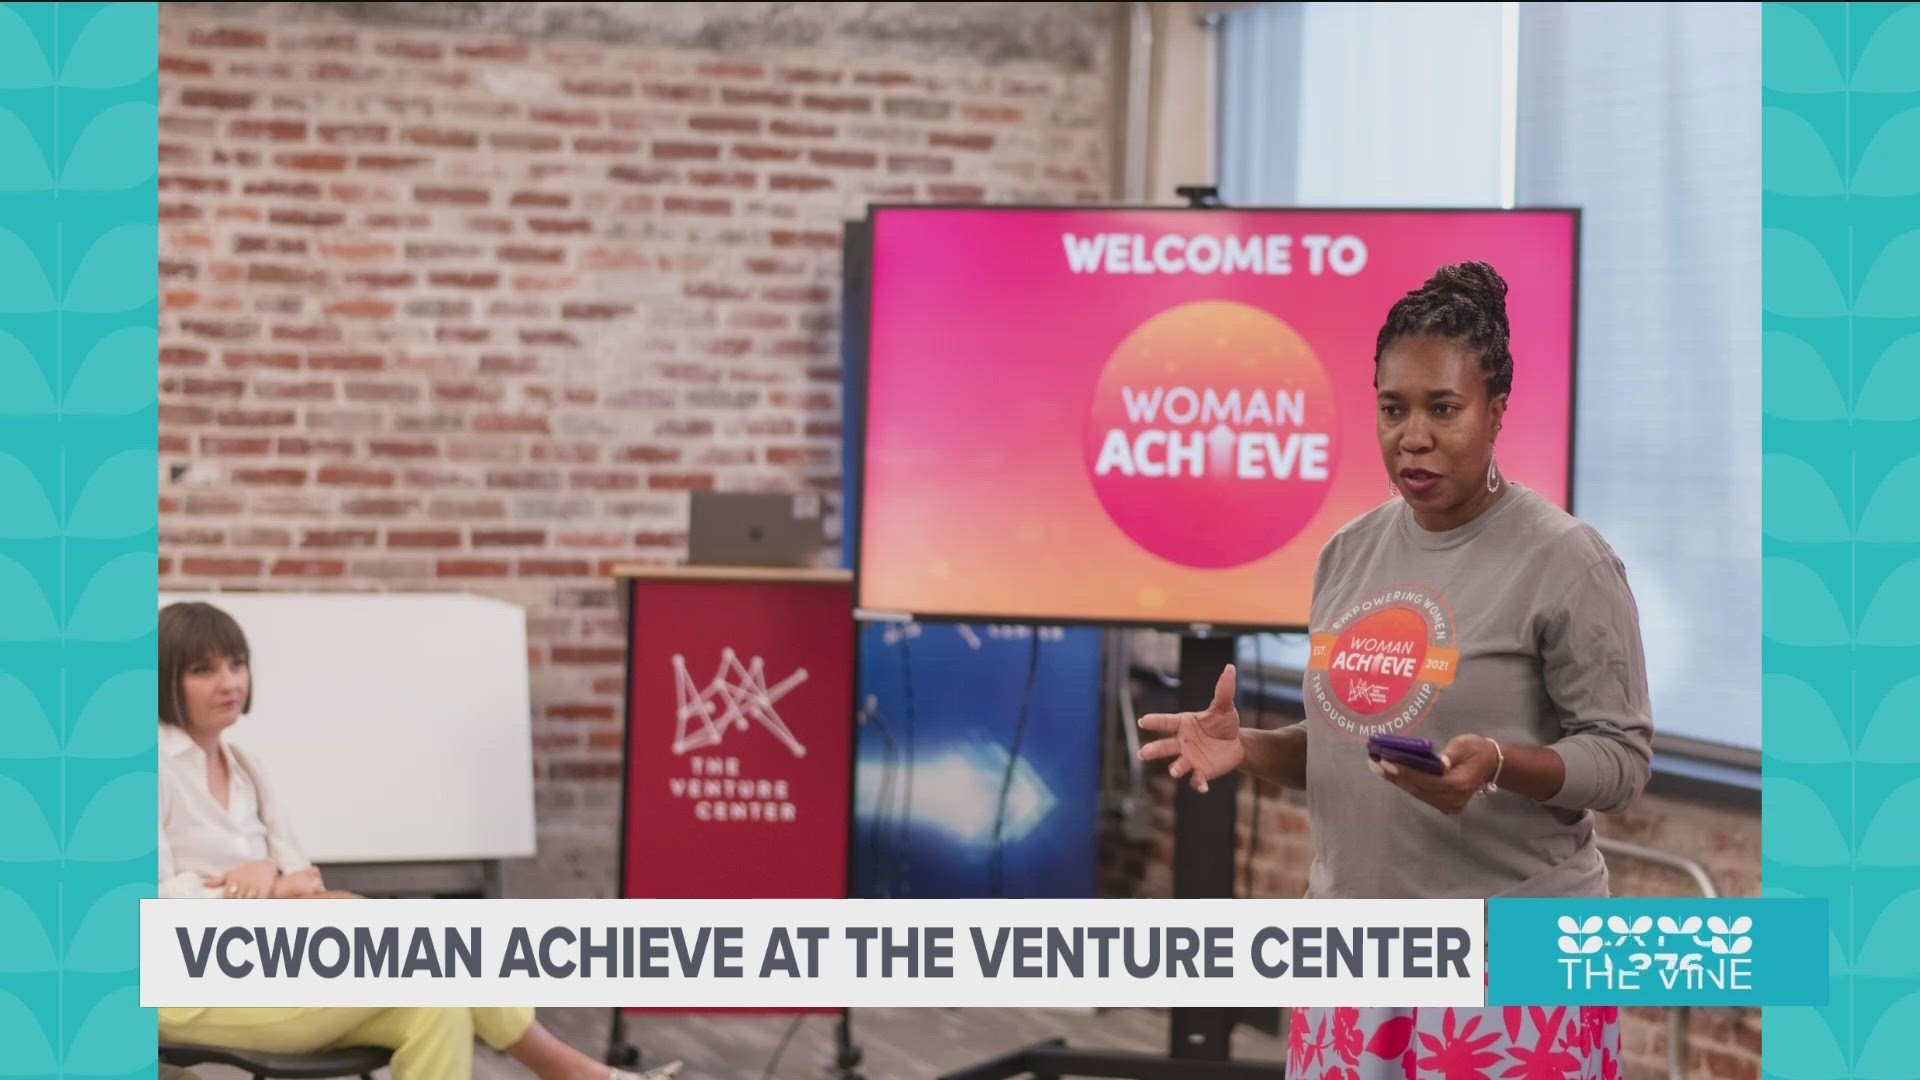 The Venture Center is a non-profit organization in Little Rock that inspires social and economic change in Arkansas and around the world.